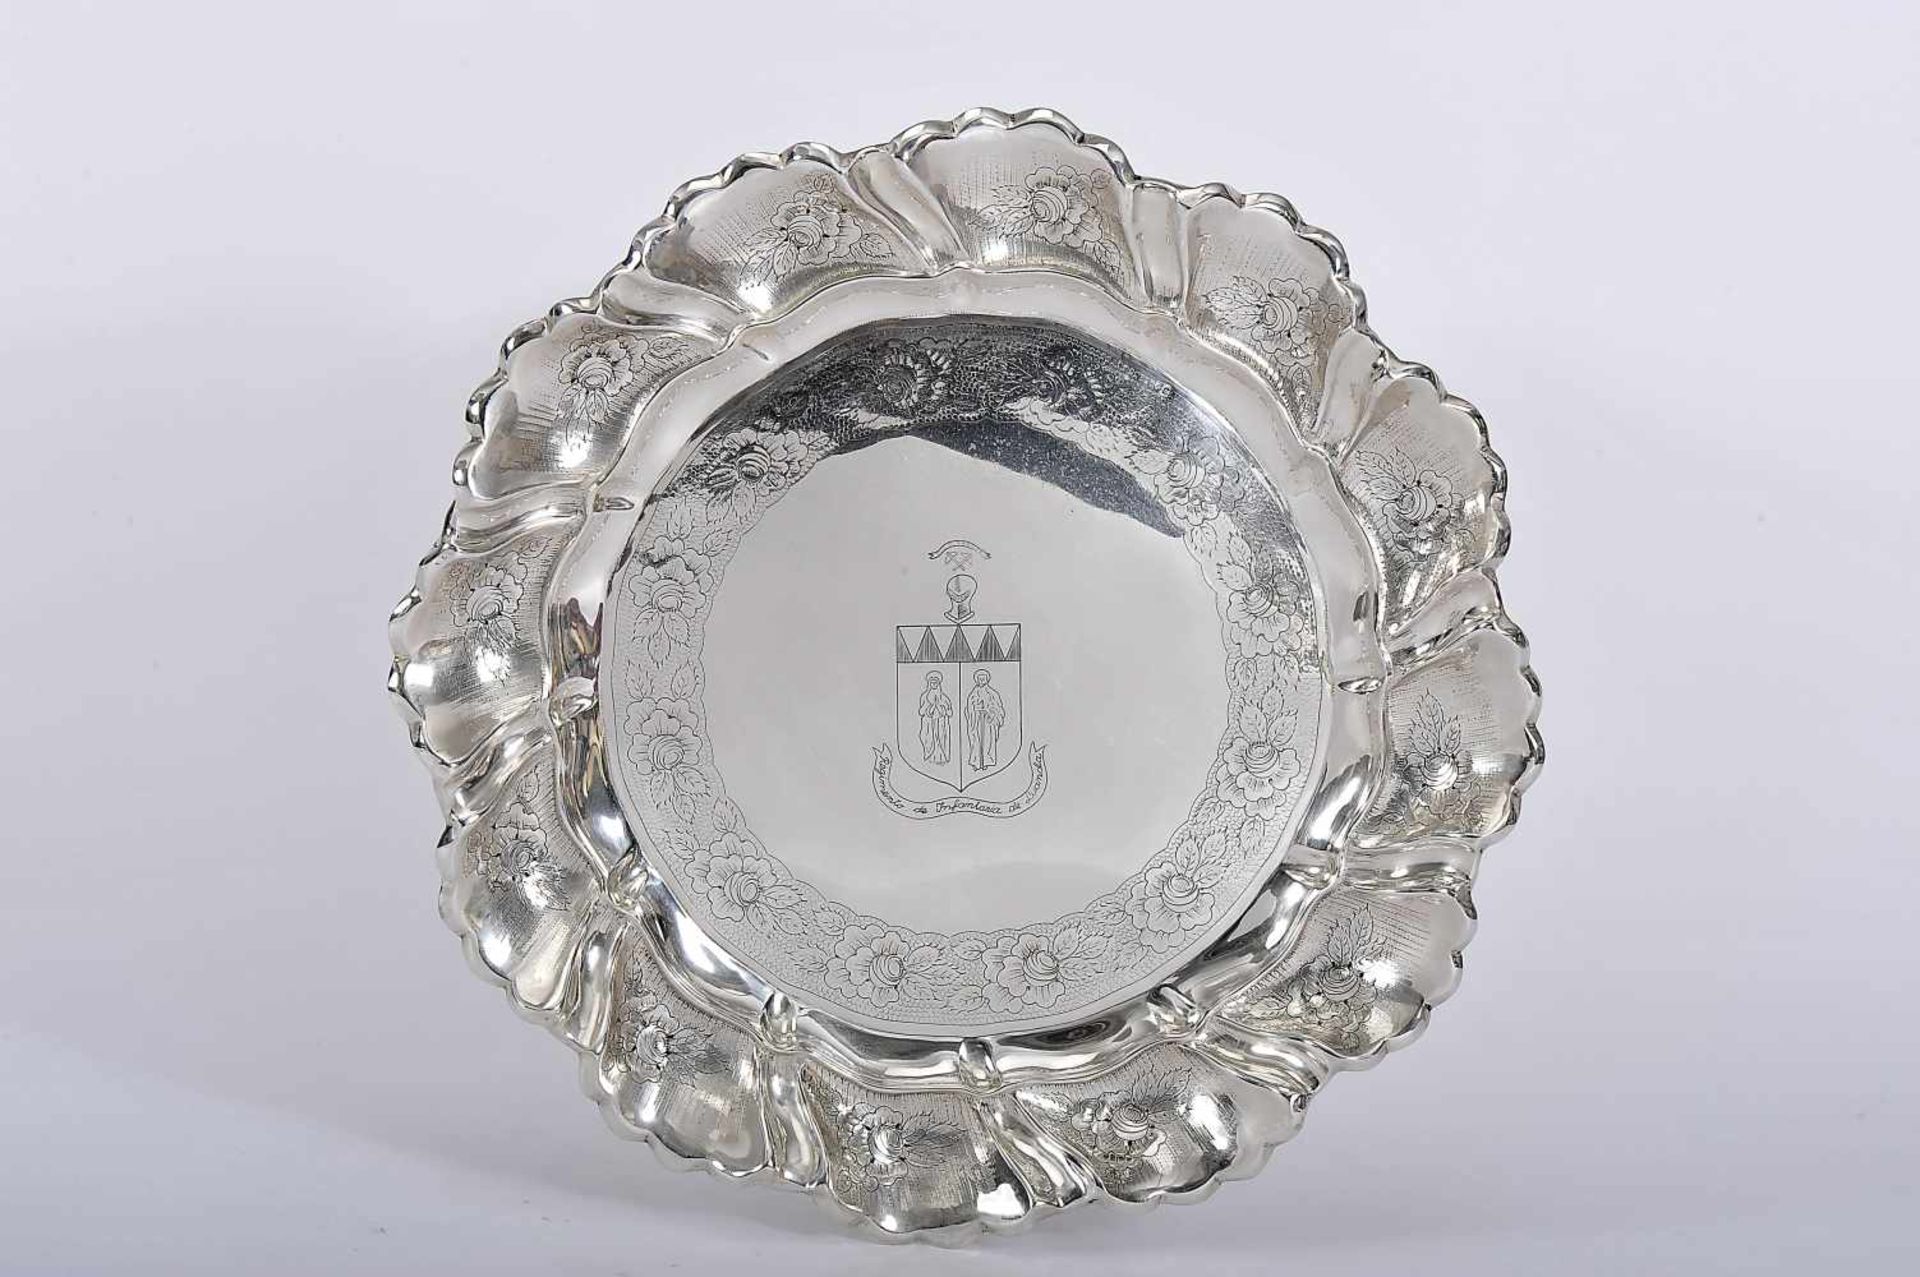 A Supension Salver with Wavy Rim, 833/1000 silver, wavy and engraved decoration "Flowers", centre